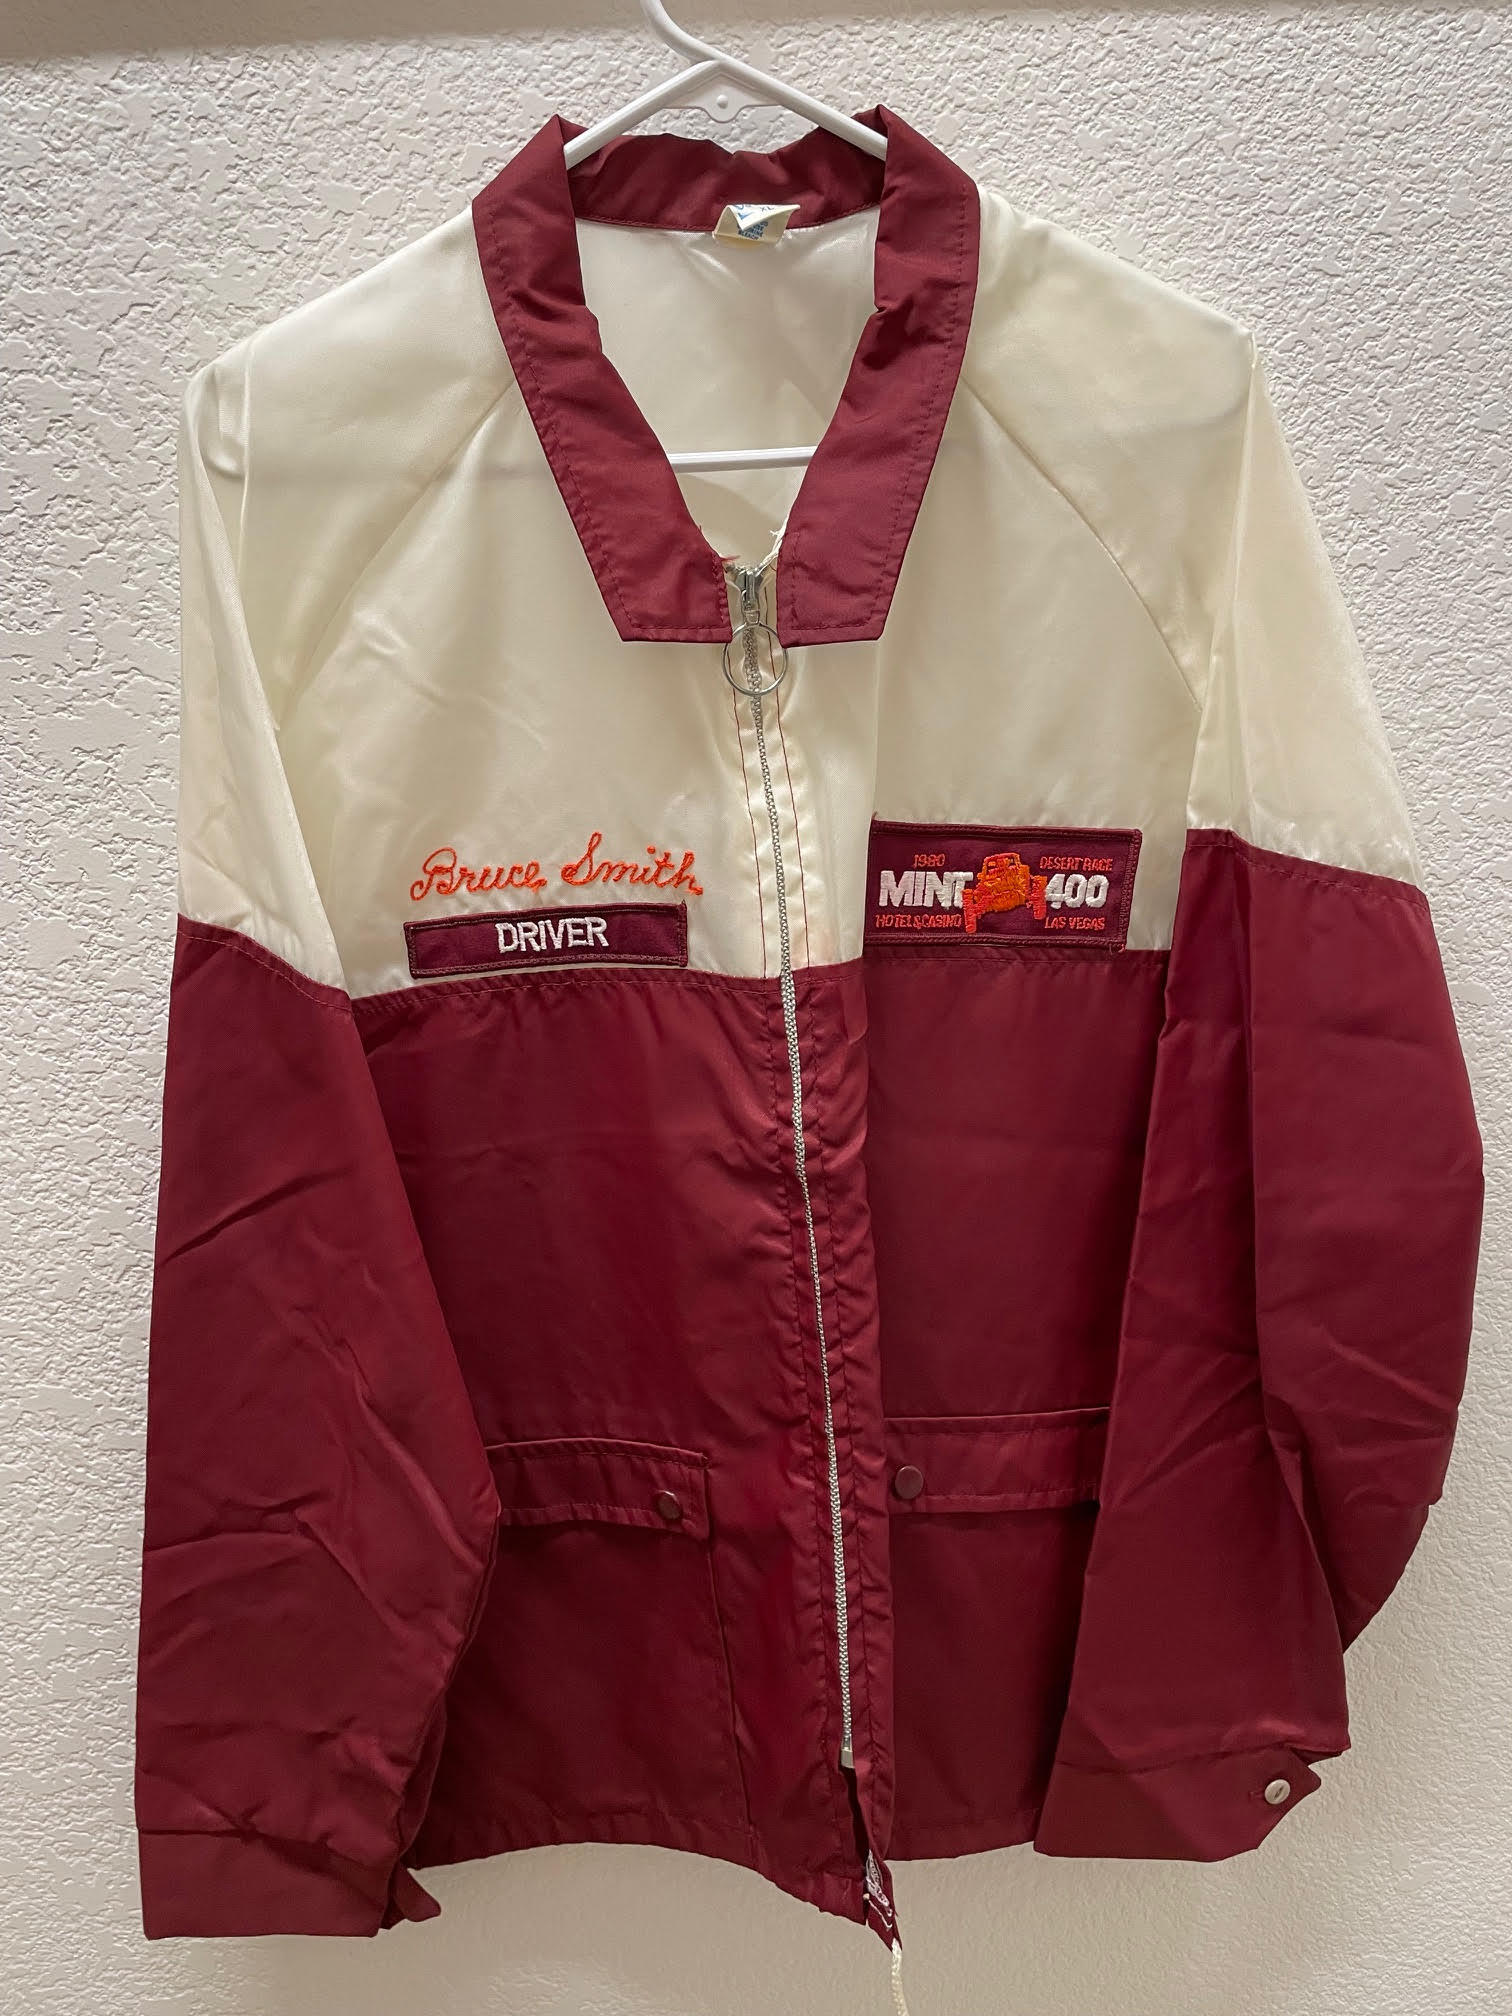 For Sale: Desert Racing Memorabilia Mostly Late 1970s -SOLD- - photo13